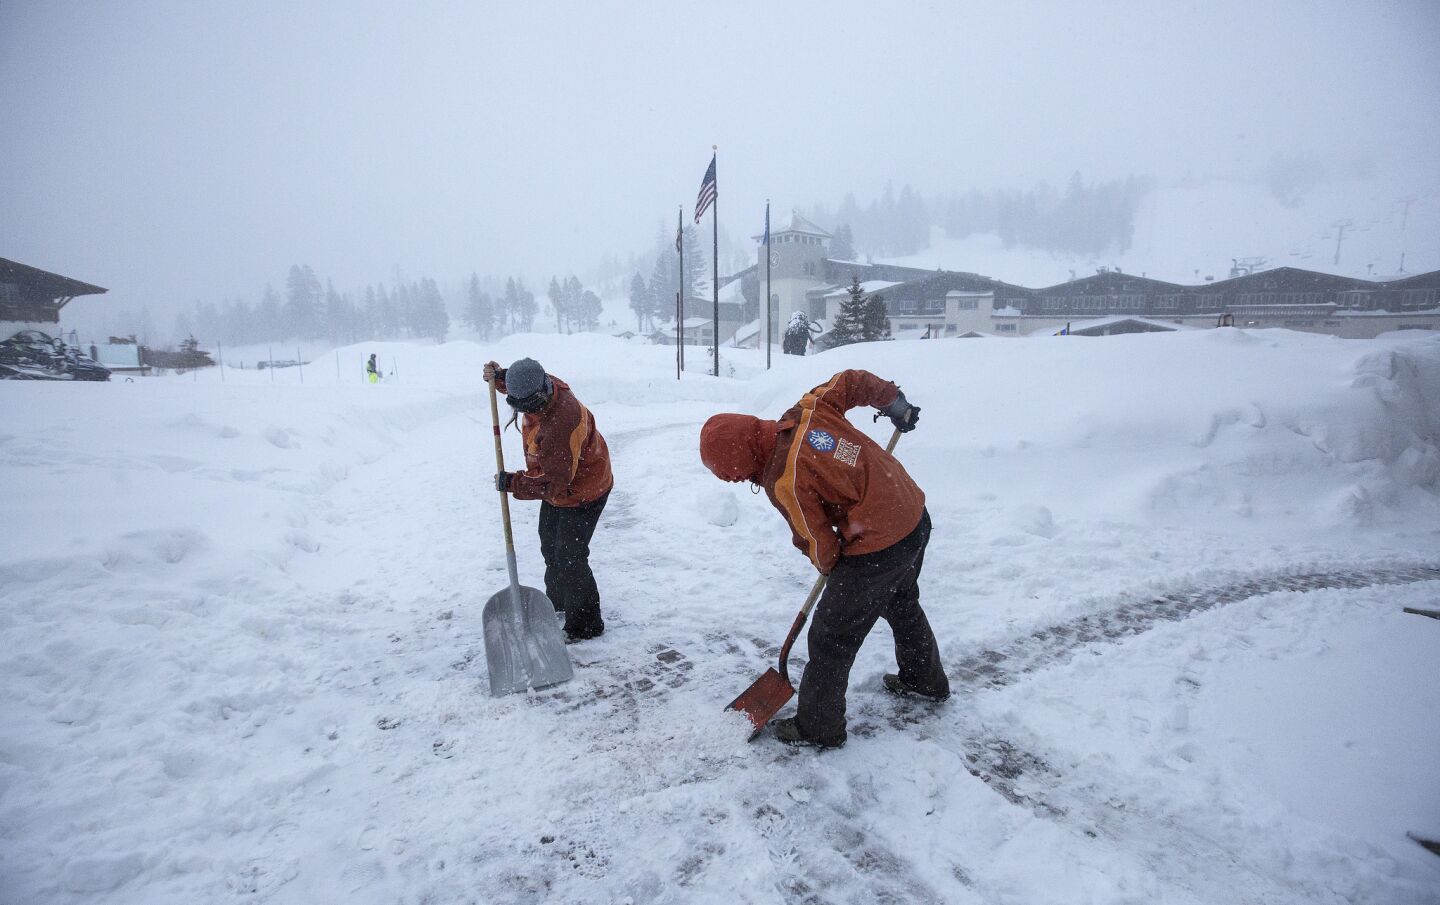 Mammoth Mountain employees clear paths as snow falls lightly Saturday morning.